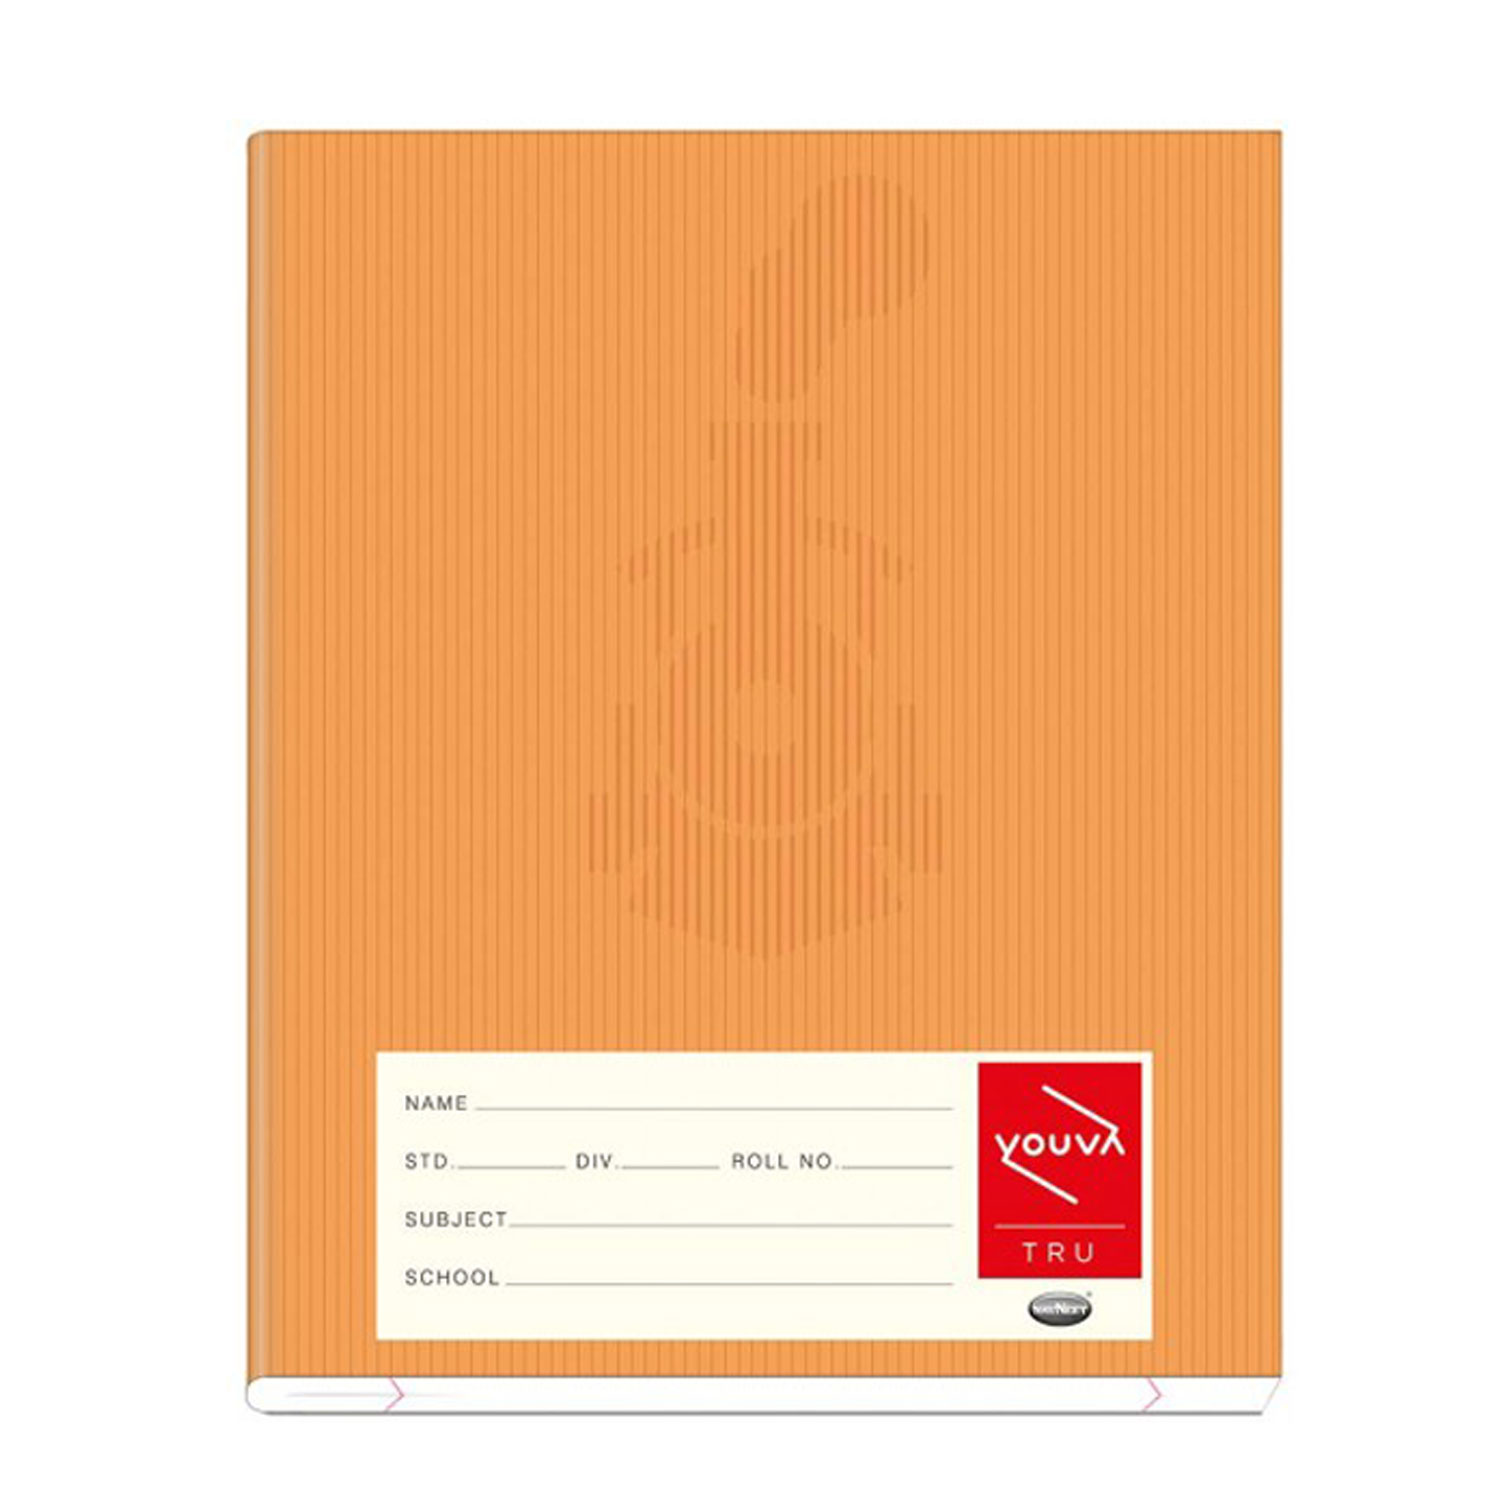 Â Medium Square | Brown Cover | Soft Bound Notebook | 172 Pages |Youva |VT23168 |Pack of 12